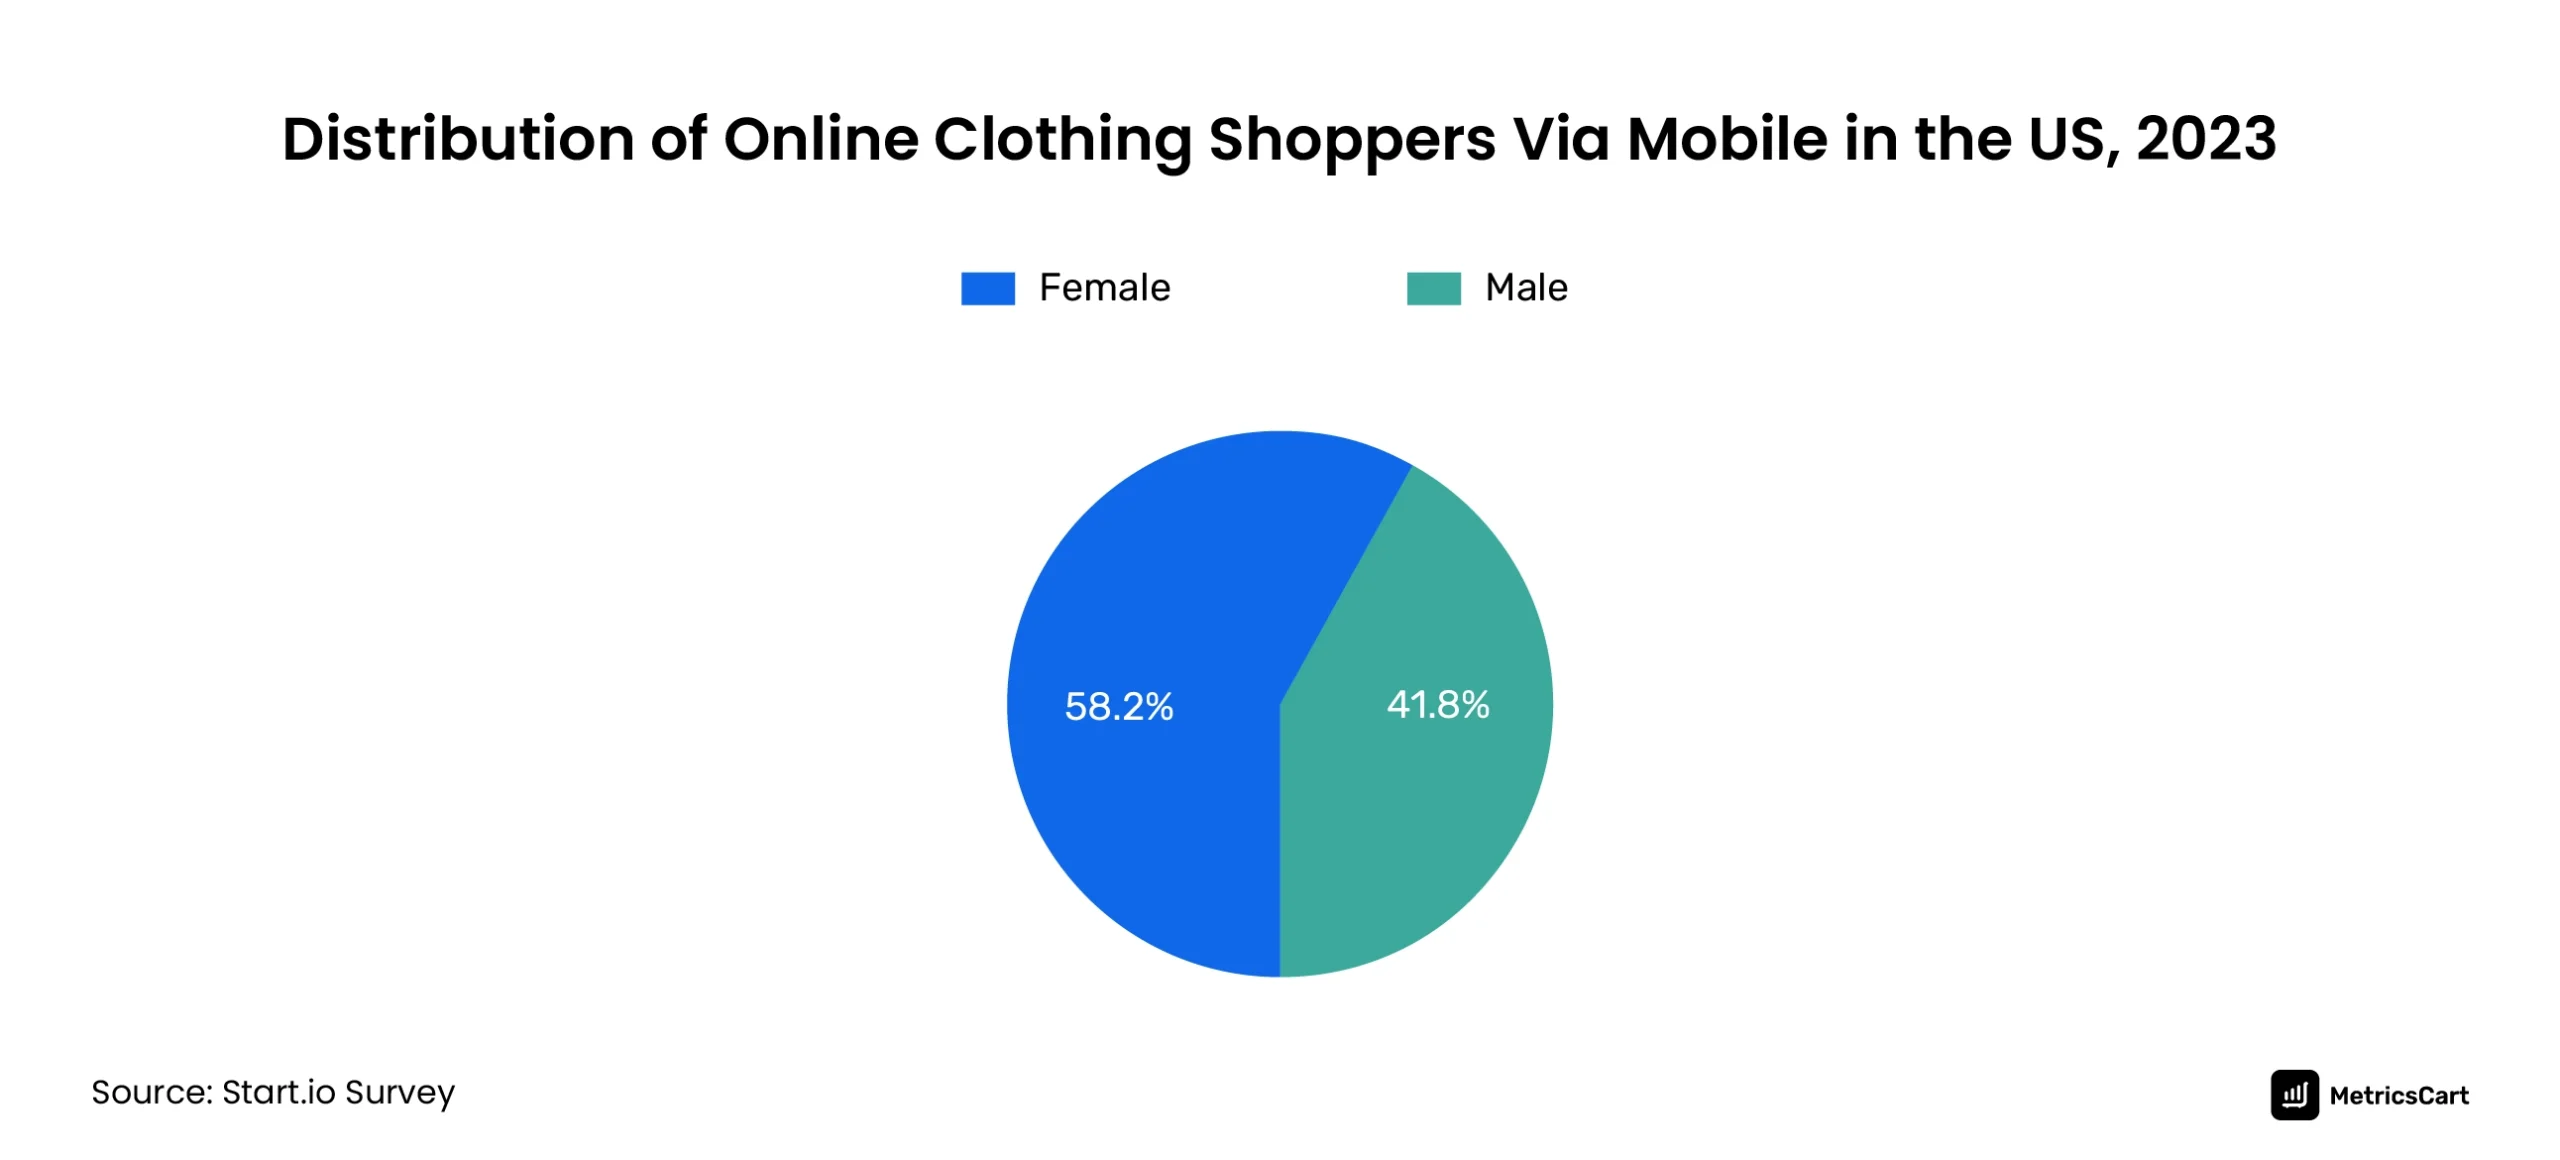 Pie chart showing Distribution of online clothing shoppers via mobile in the US